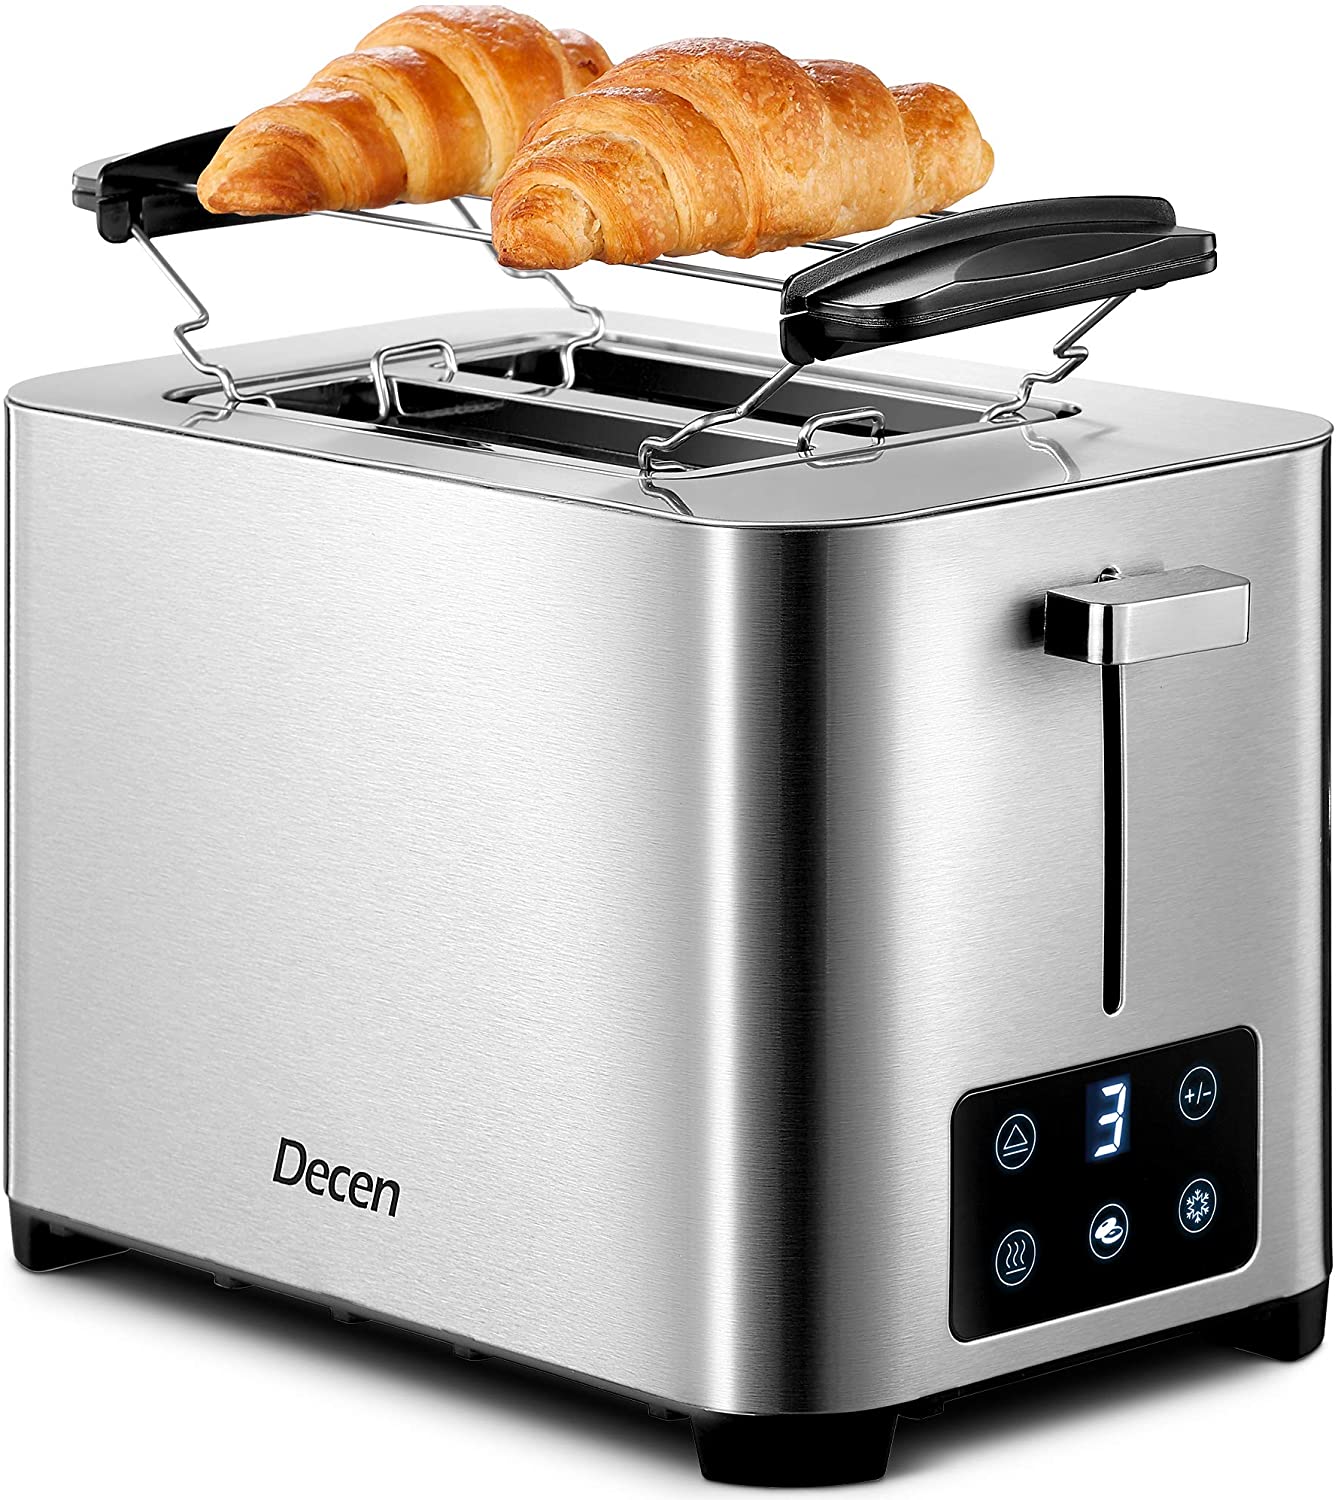 Aicok 2 Slice Automatic Toaster Stainless Steel Extra Wide Slots